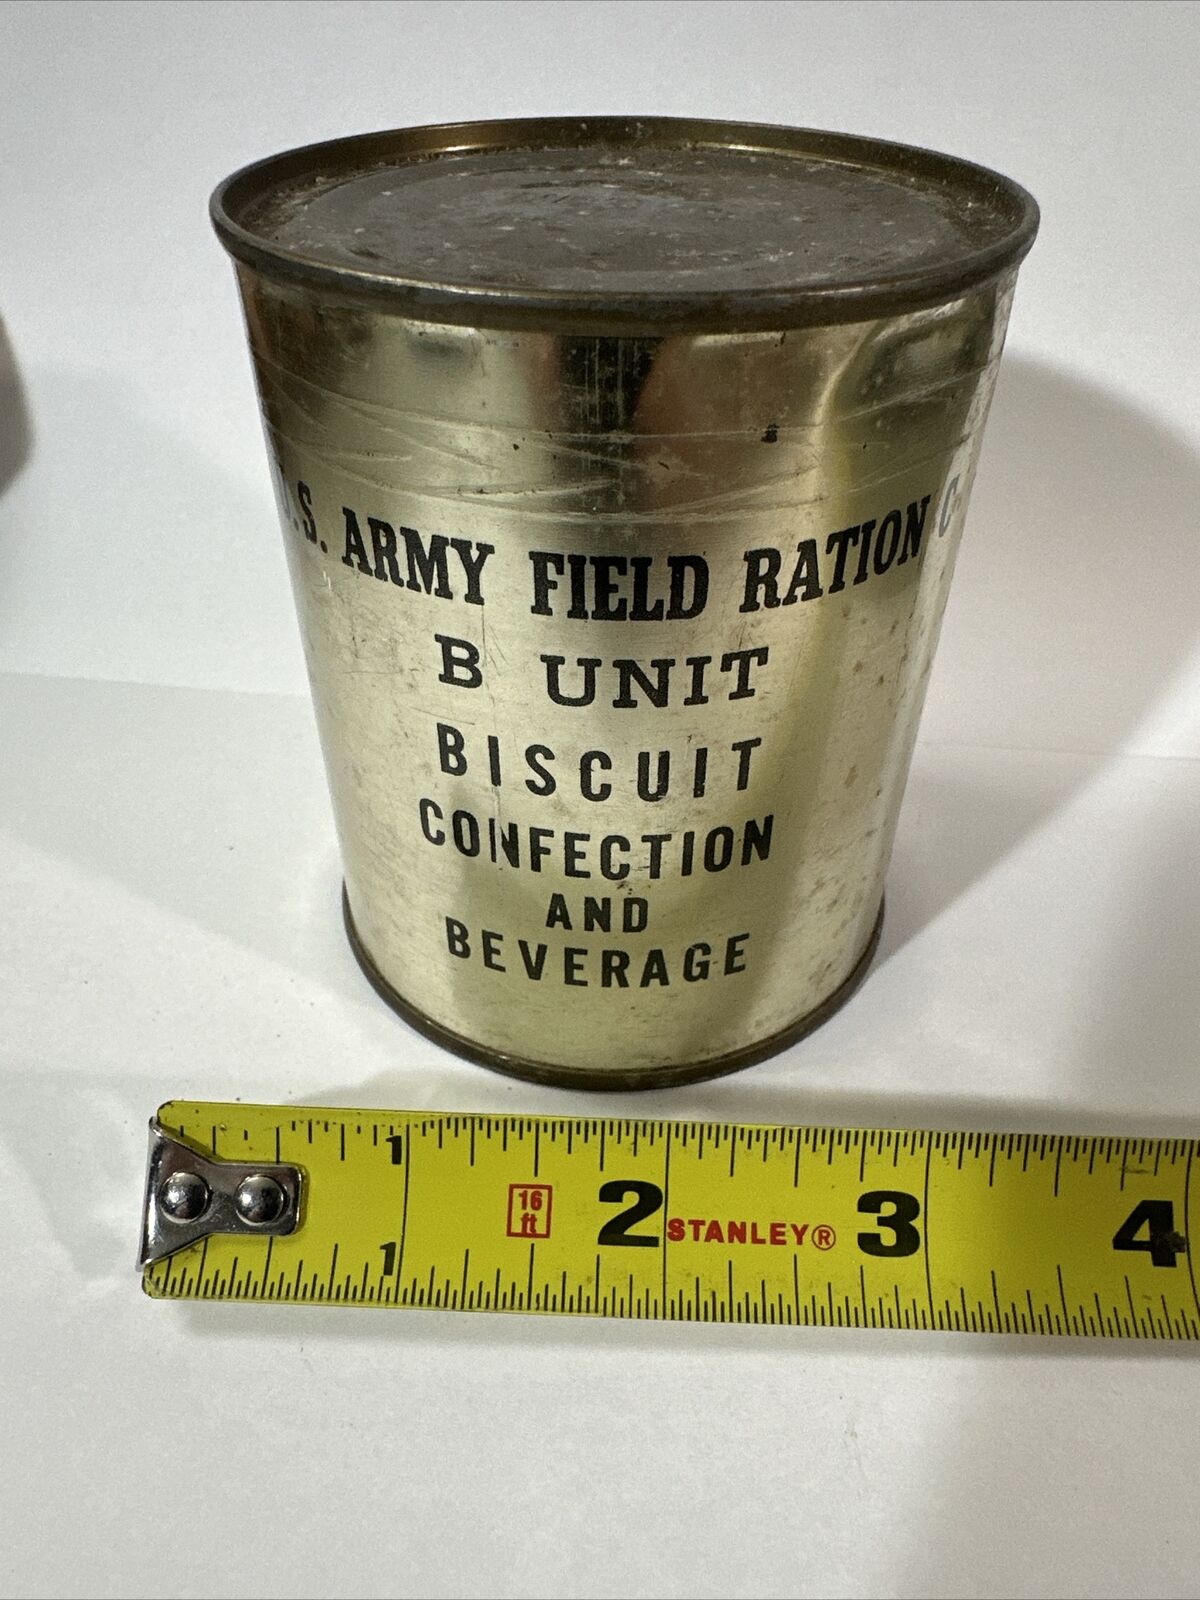 October 1942 WWII US Army Field Ration C Biscuit Confection Beverage B Unit #2